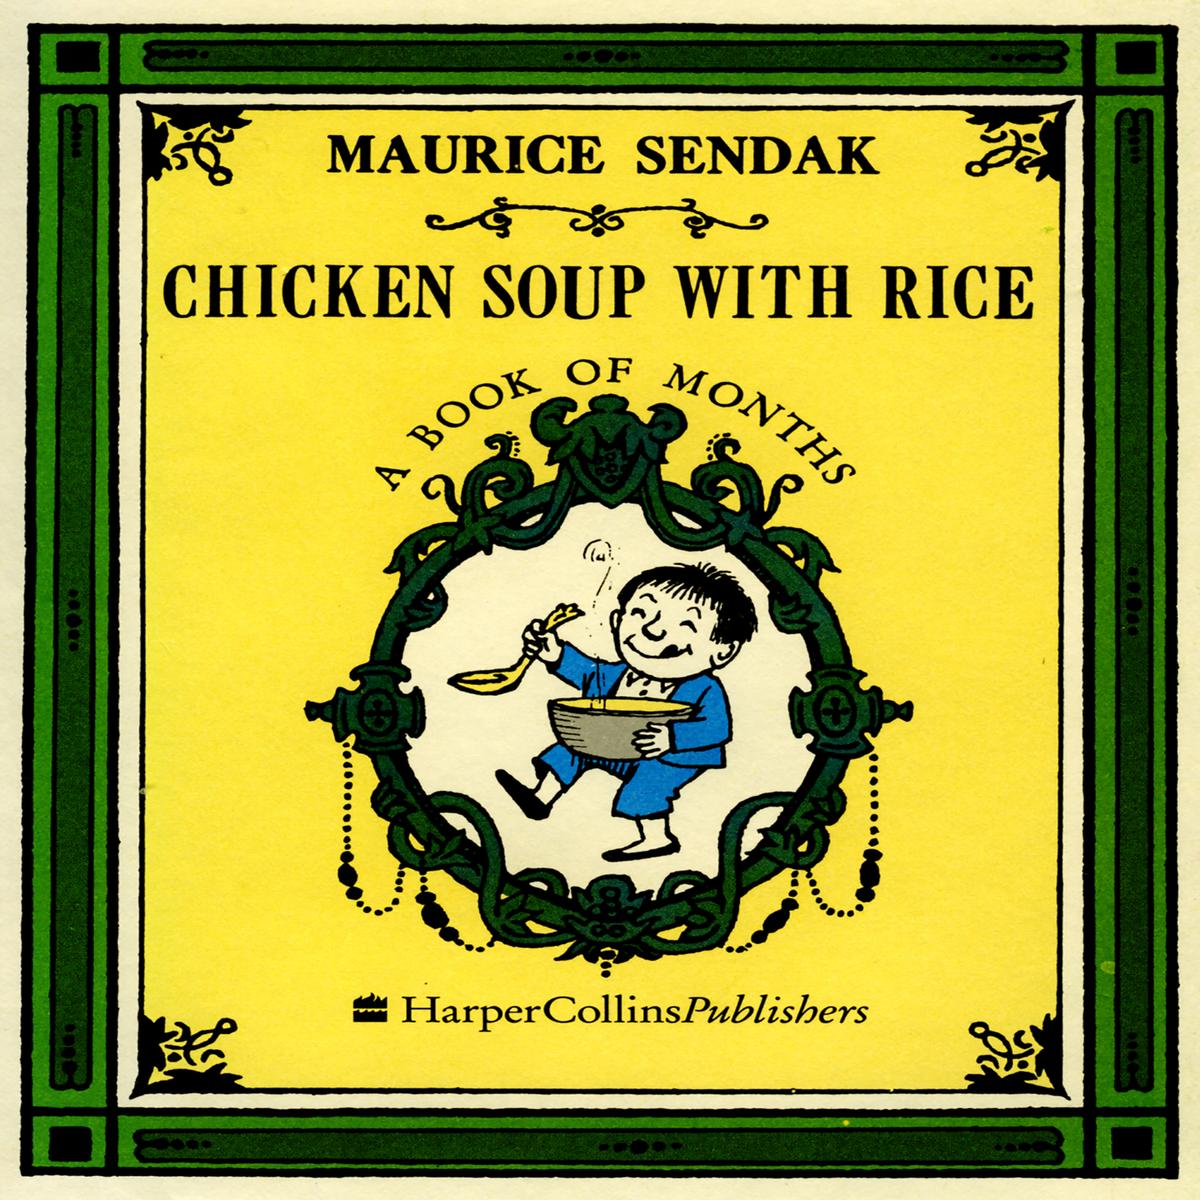 chicken-soup-with-rice.jpg